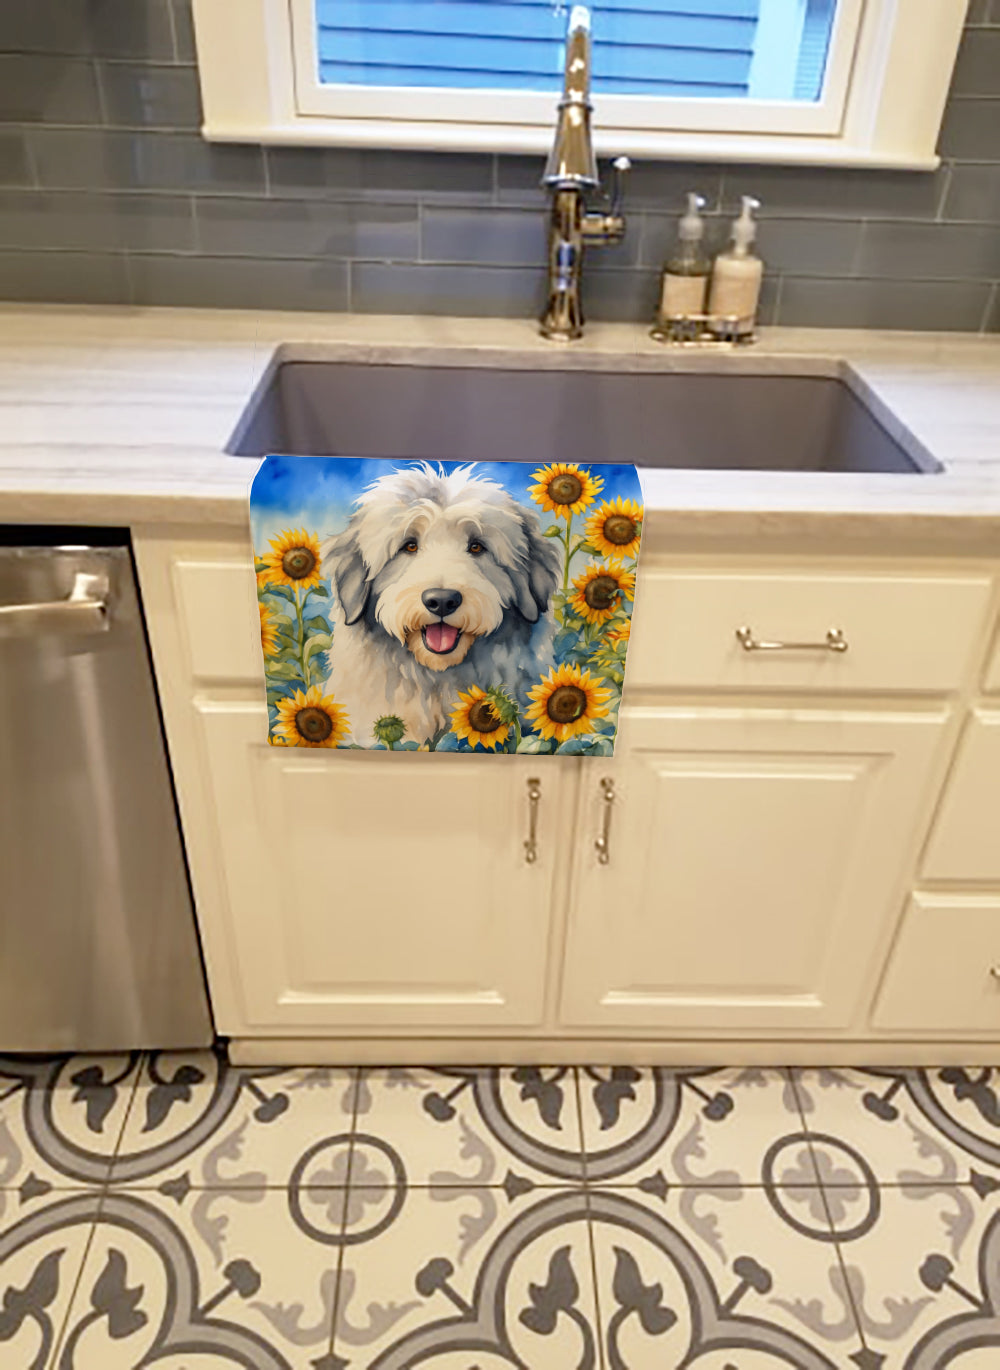 Buy this Old English Sheepdog in Sunflowers Kitchen Towel